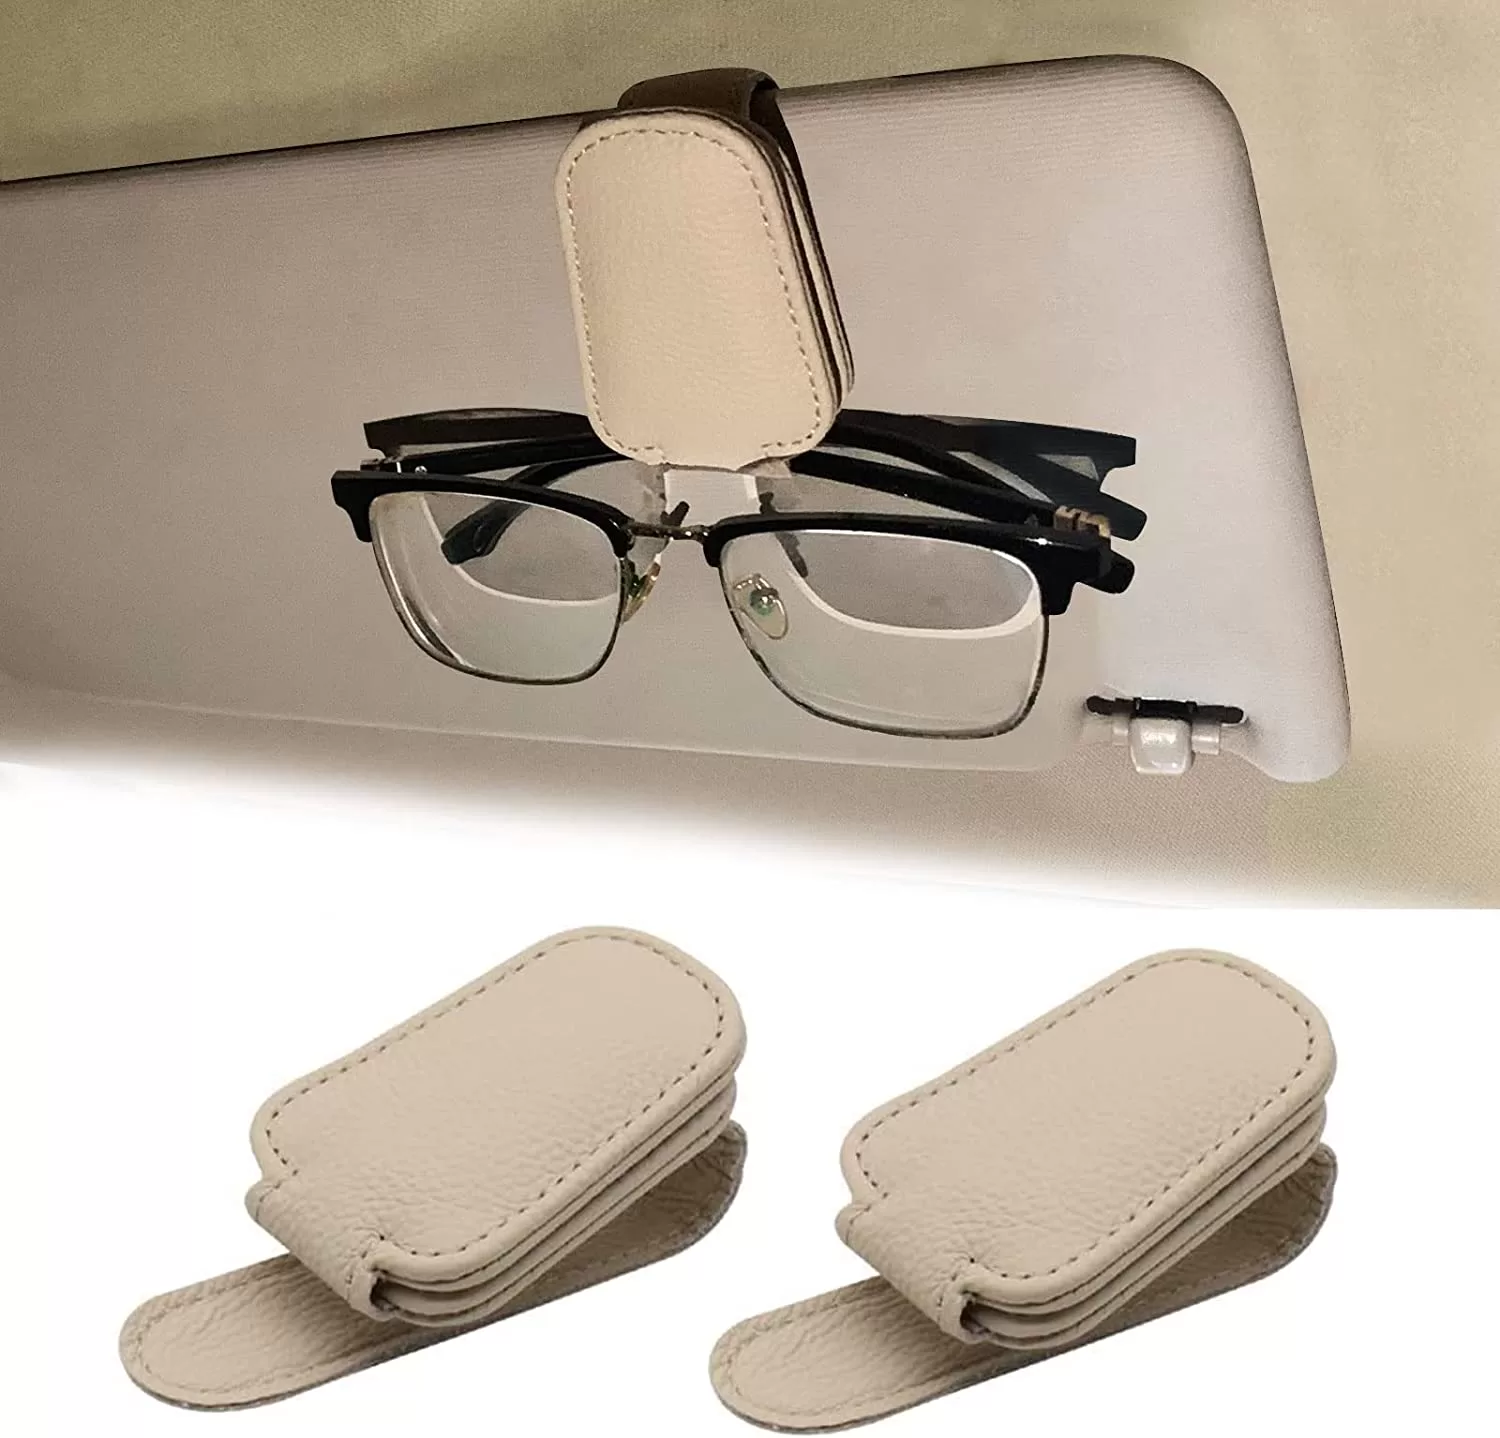 The Perfect Car Accessory: Keep Your Sunglasses Safe with Magnetic Leather Car Visor Sunglass Holders!